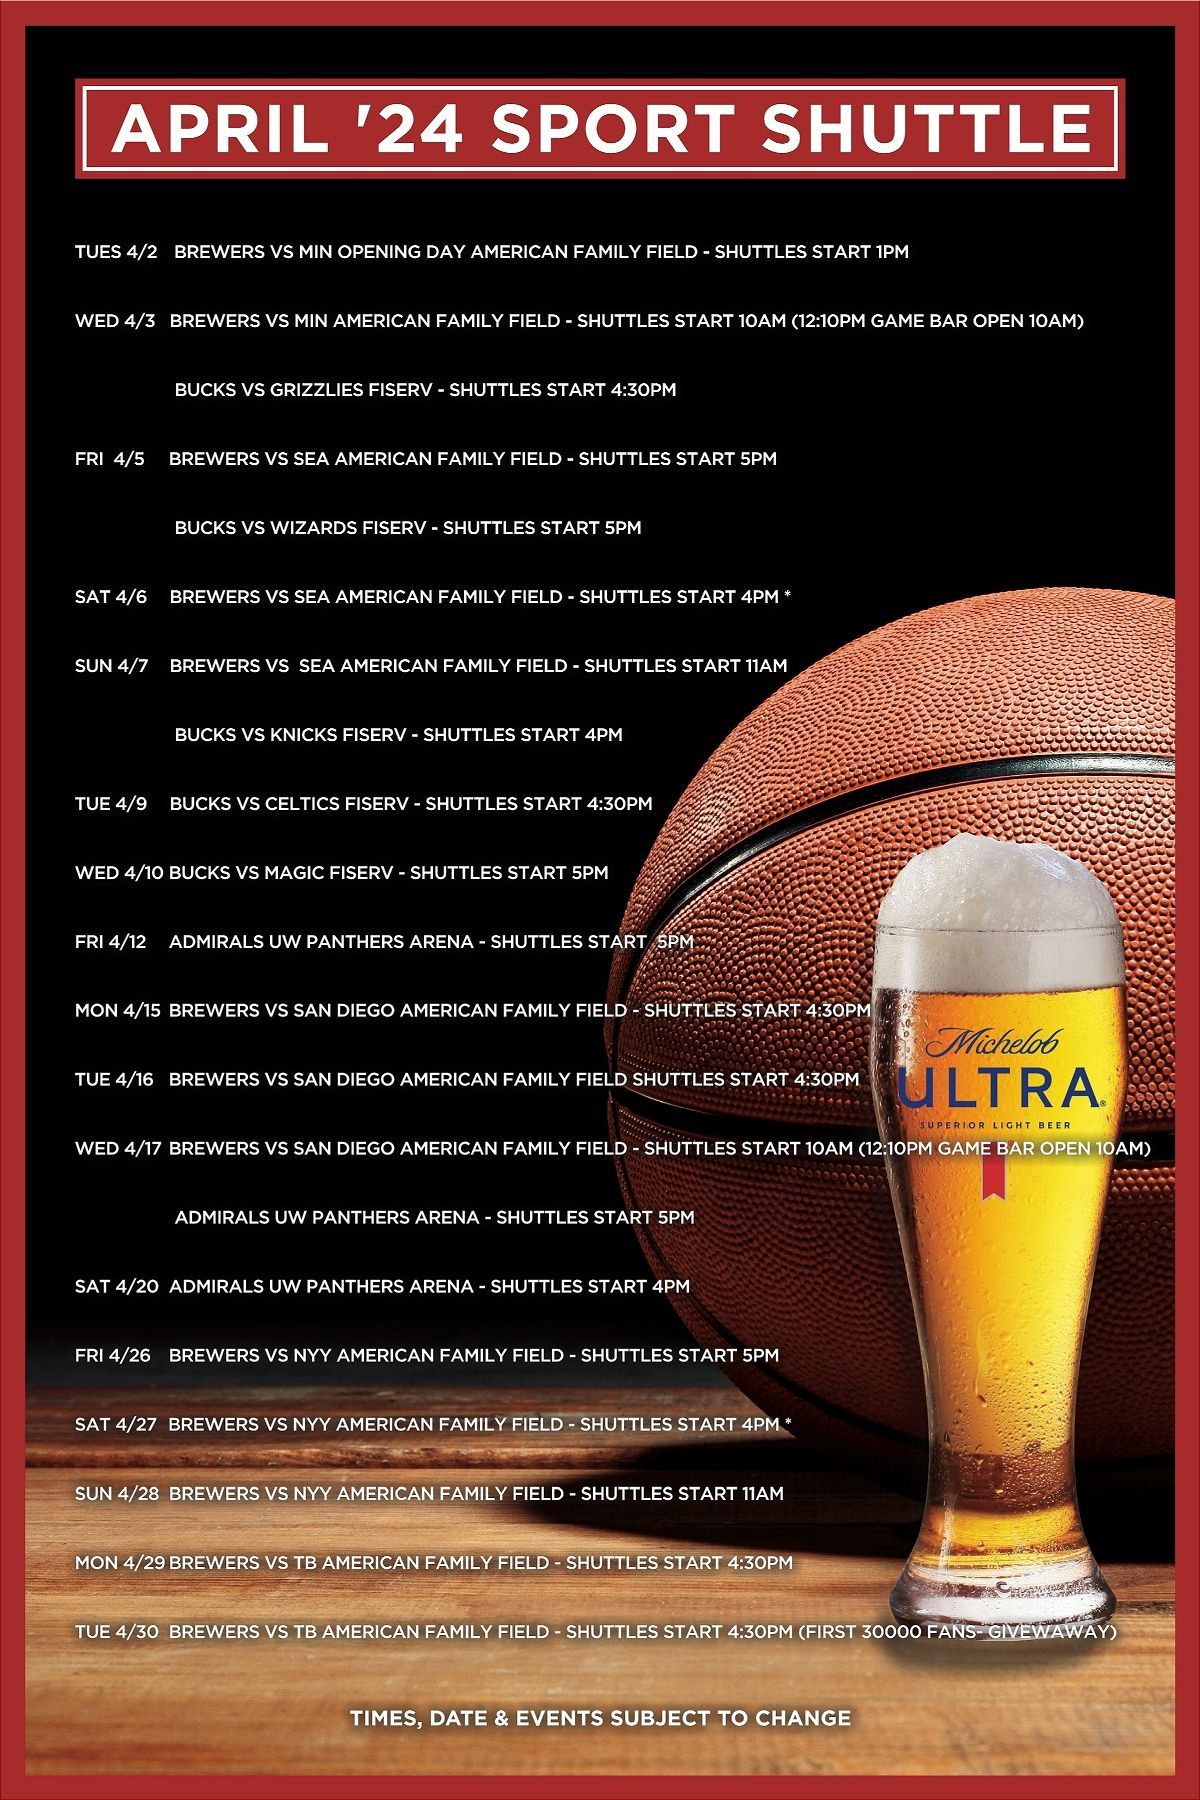 A poster for the april 24 sport shuttle with a glass of beer and a basketball